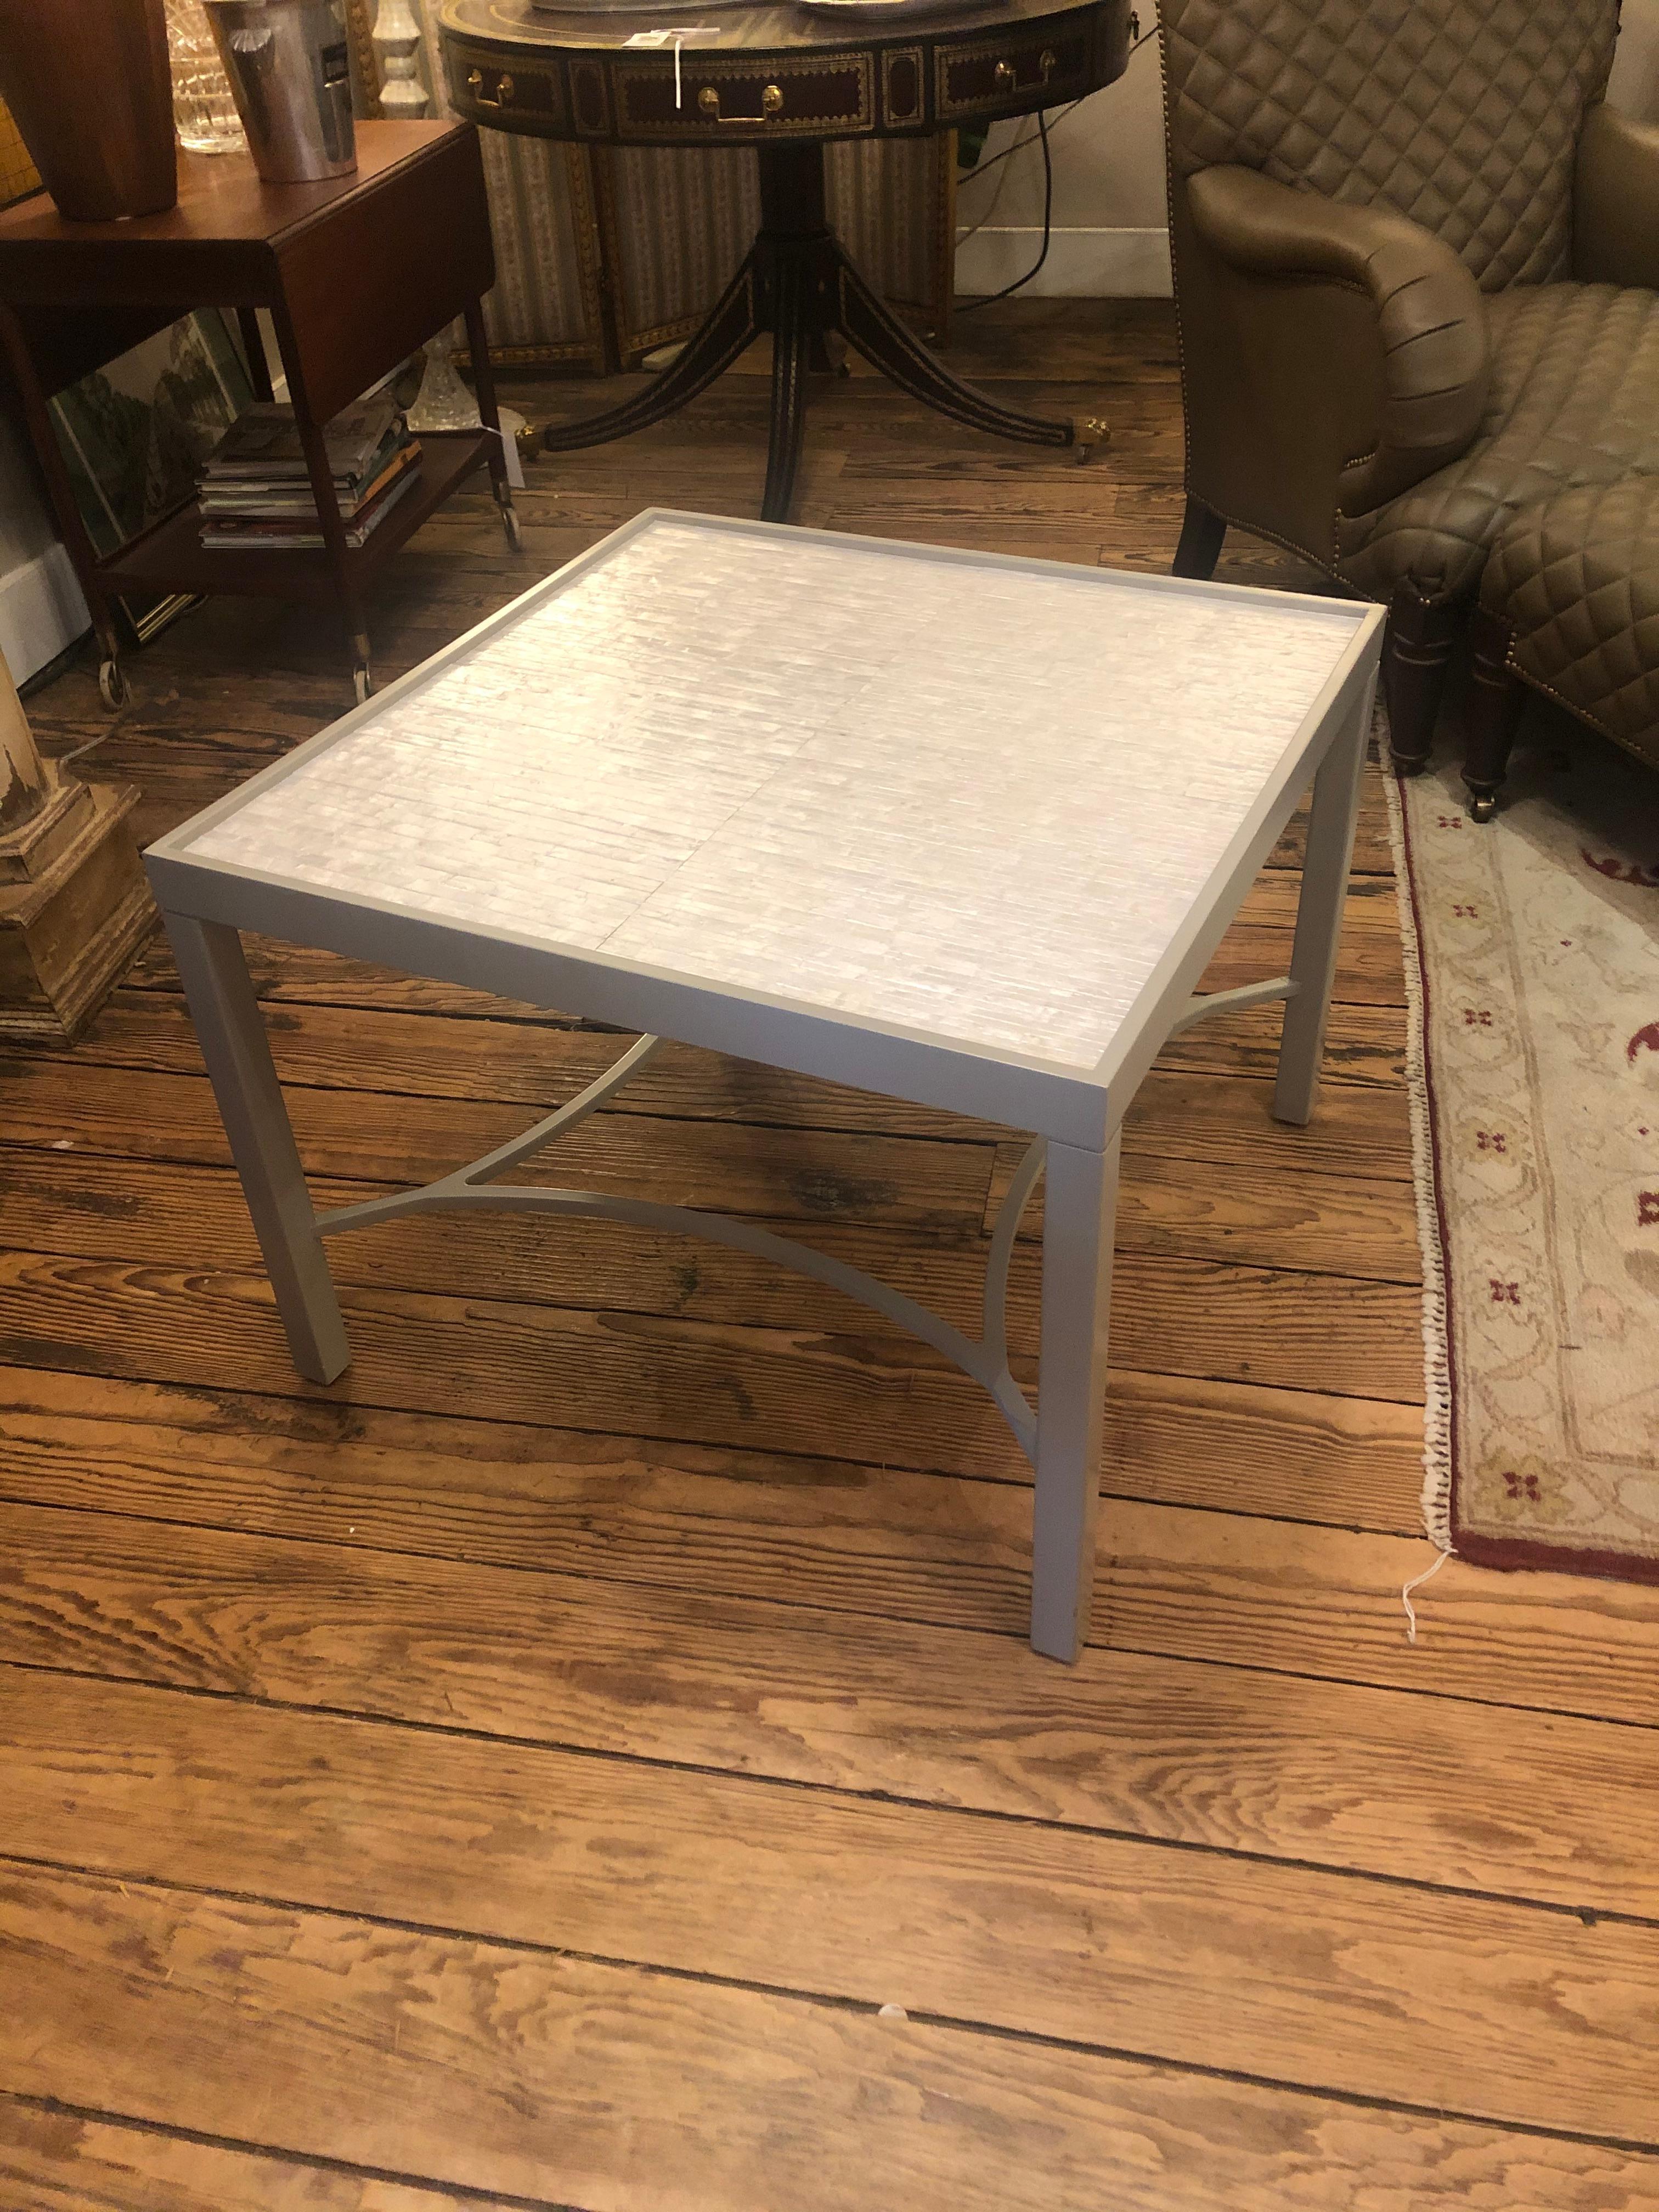 Sleek white and gray square cocktail table having recessed mosaic like faux mother of pearl or tessellated stone top and soft gray painted base with handsome stretcher underneath.